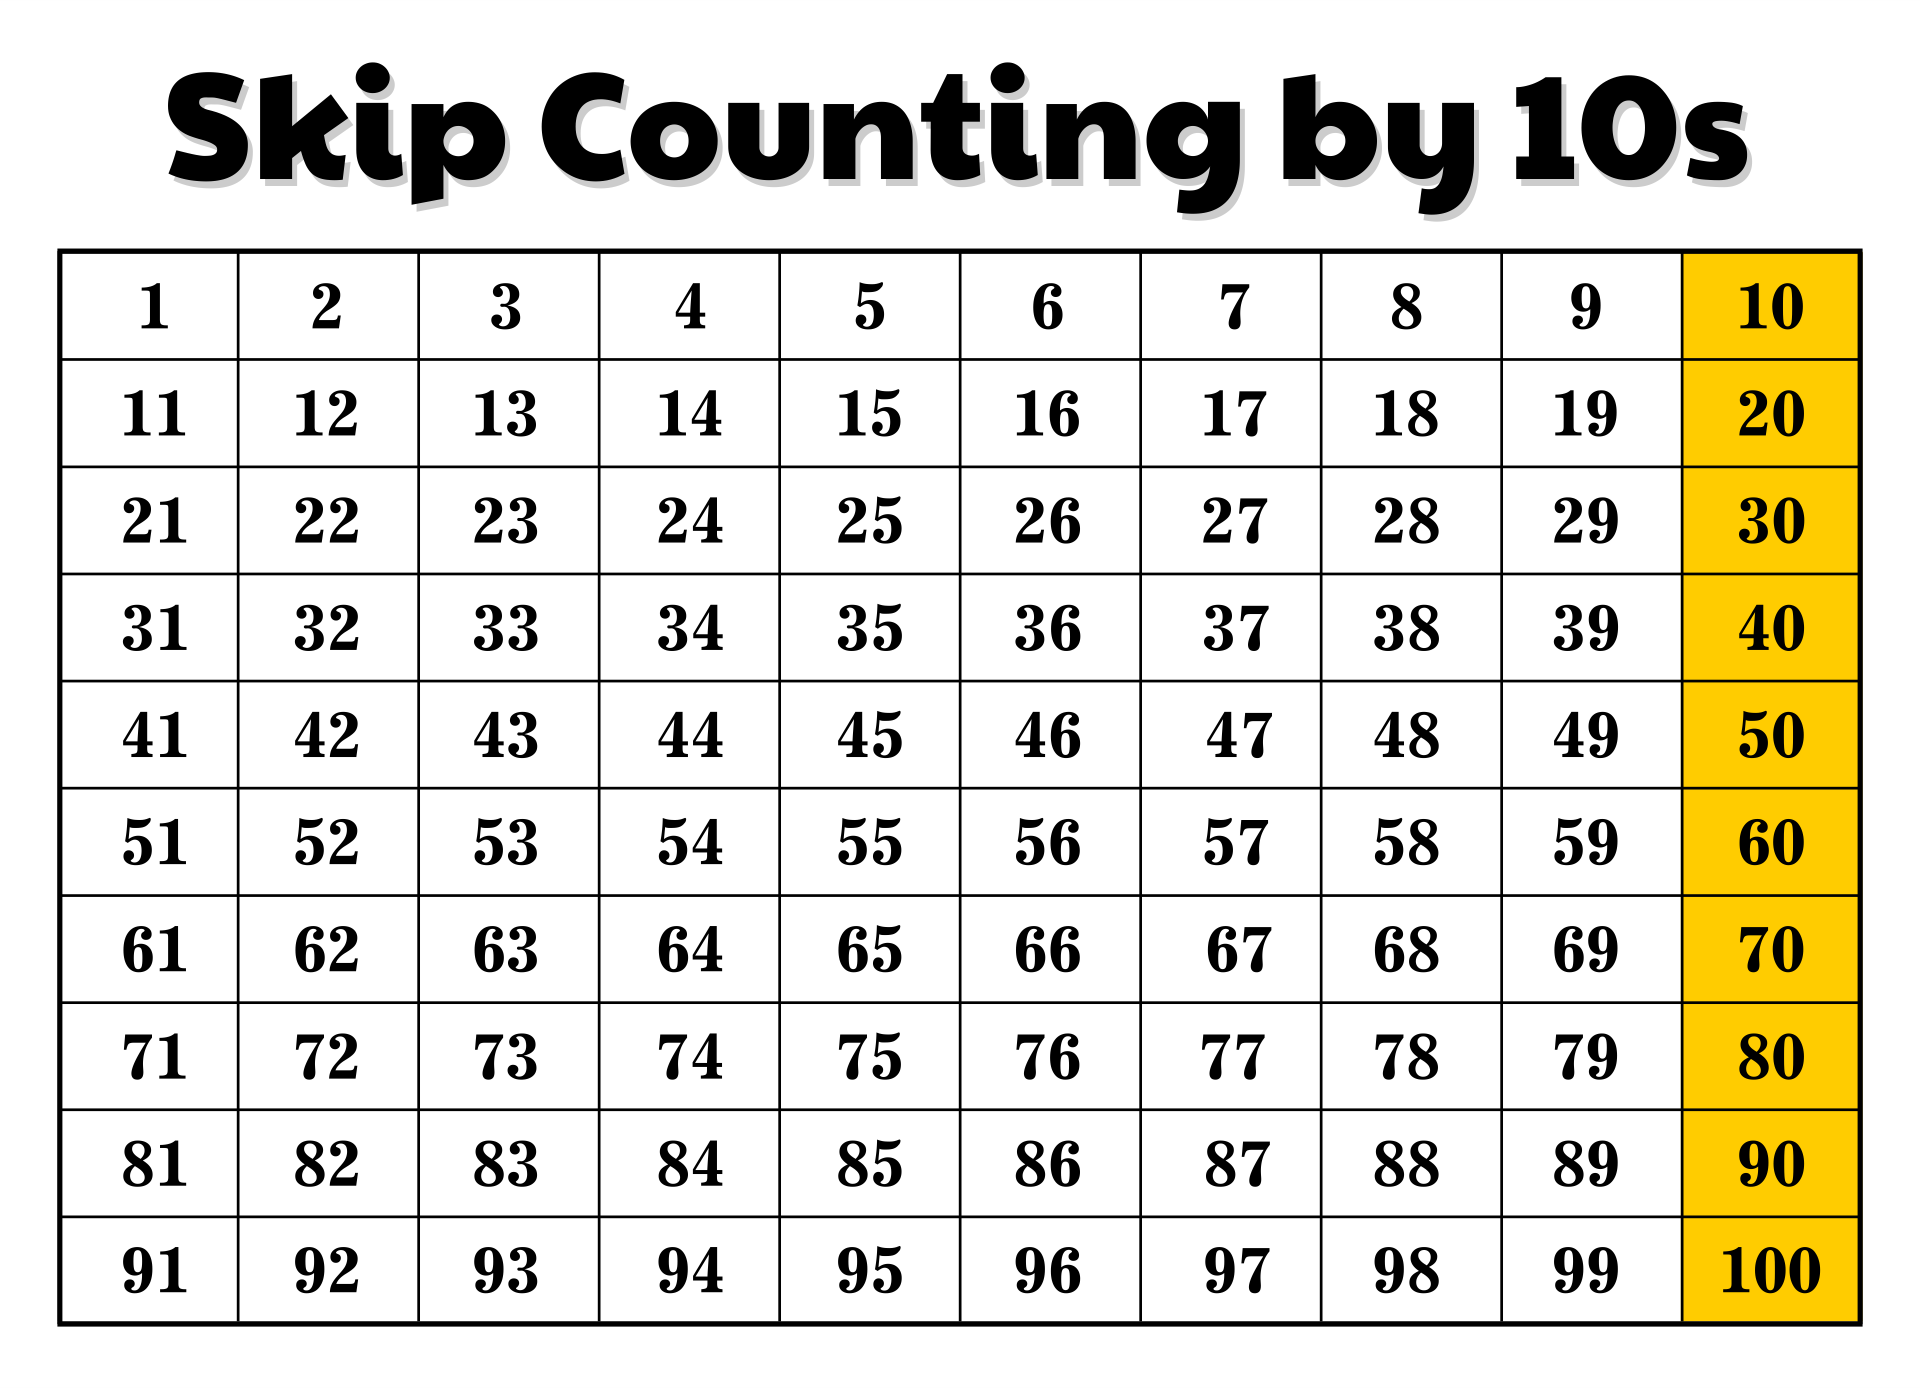 5-best-images-of-counting-by-10s-chart-printable-multiplication-skip-counting-by-chart-skip